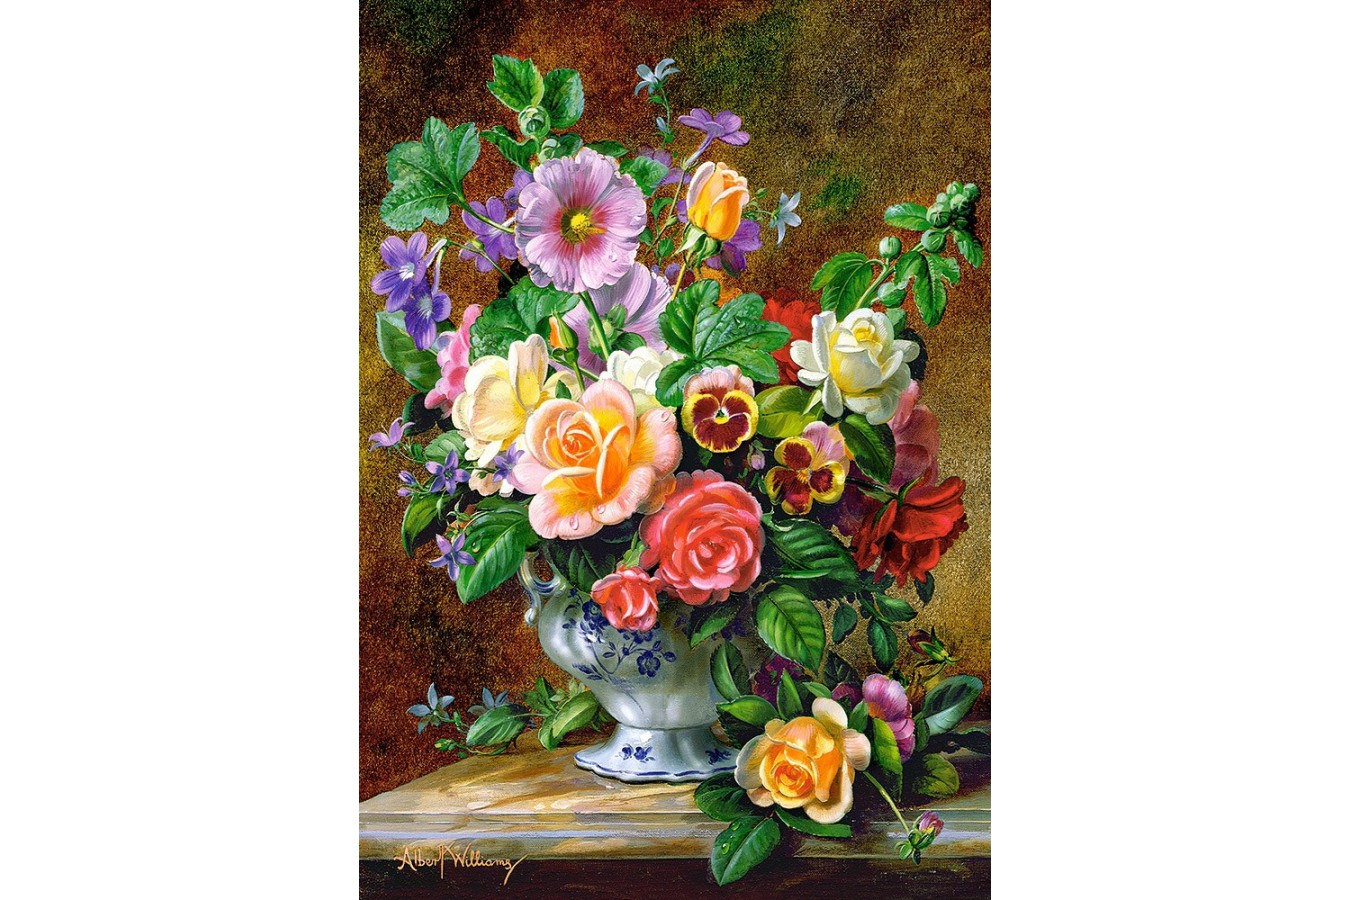 Puzzle Castorland - Flowers in a vase, 500 piese